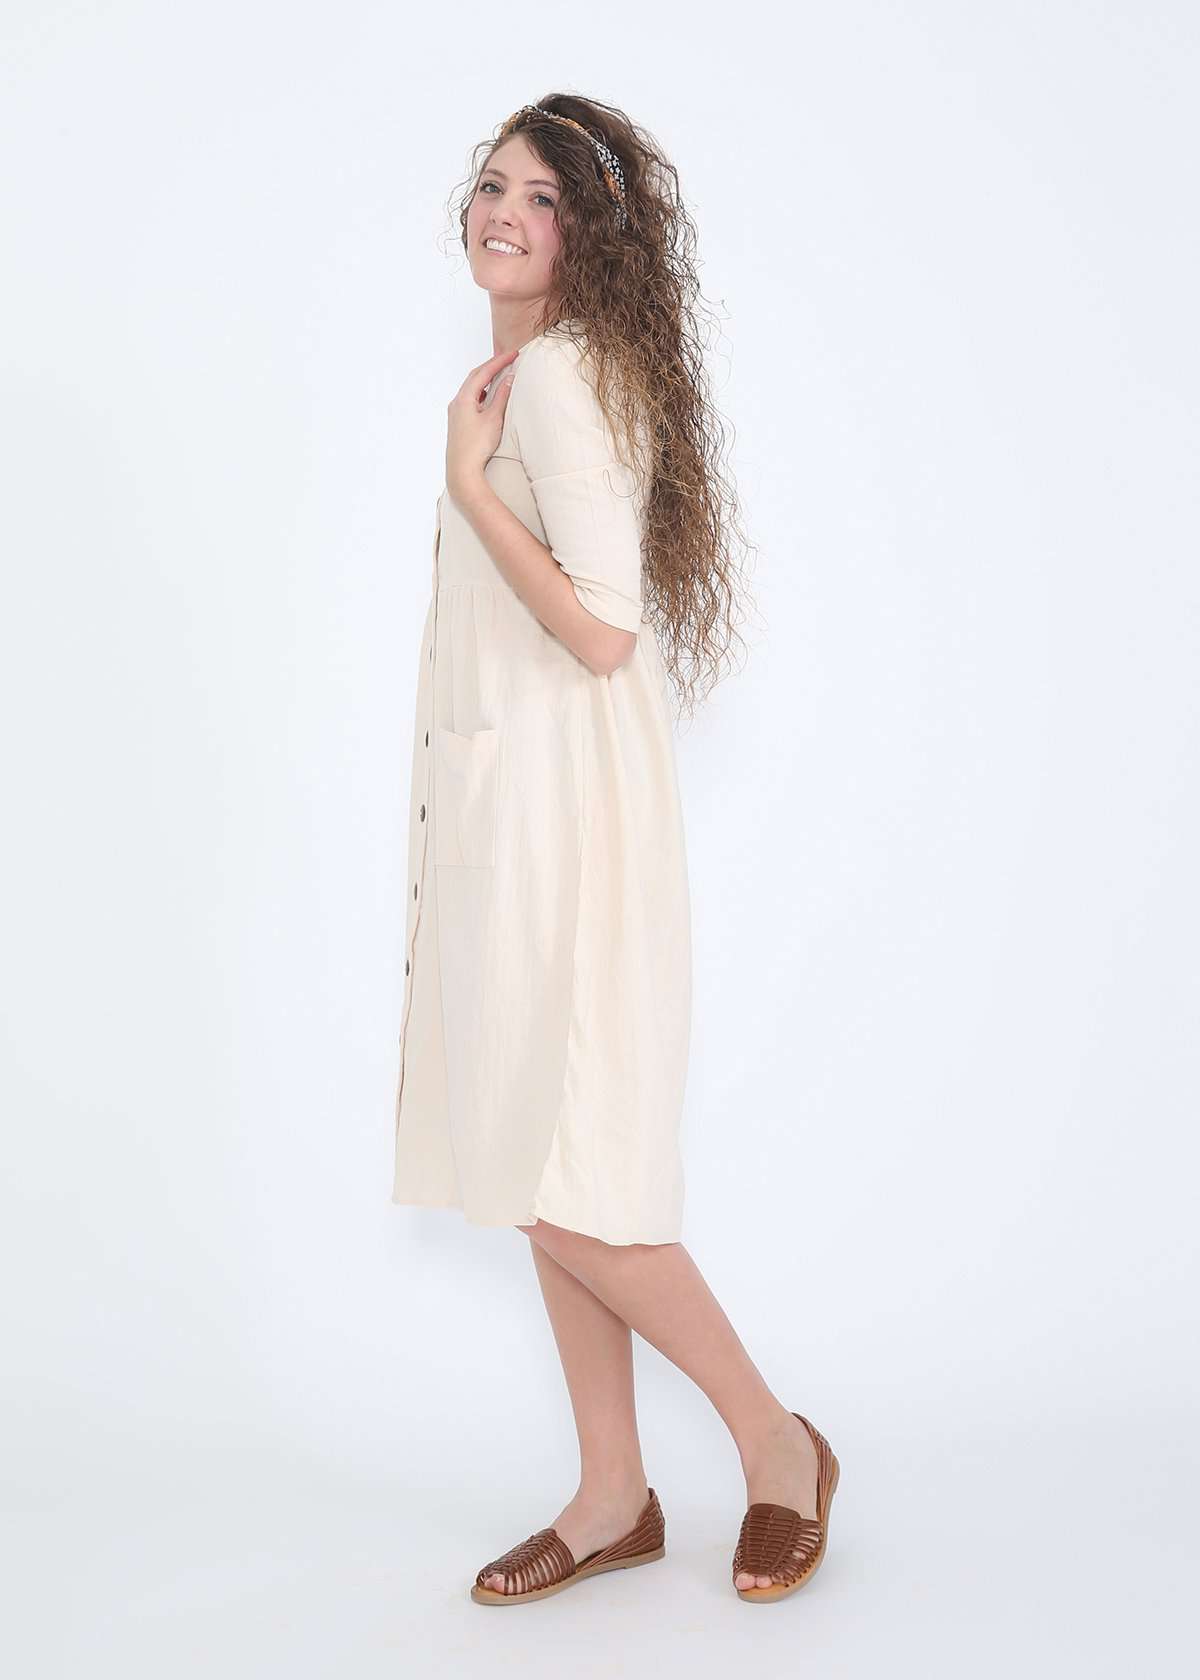 Modest women's cream cotton dress with brown buttons and half sleeves